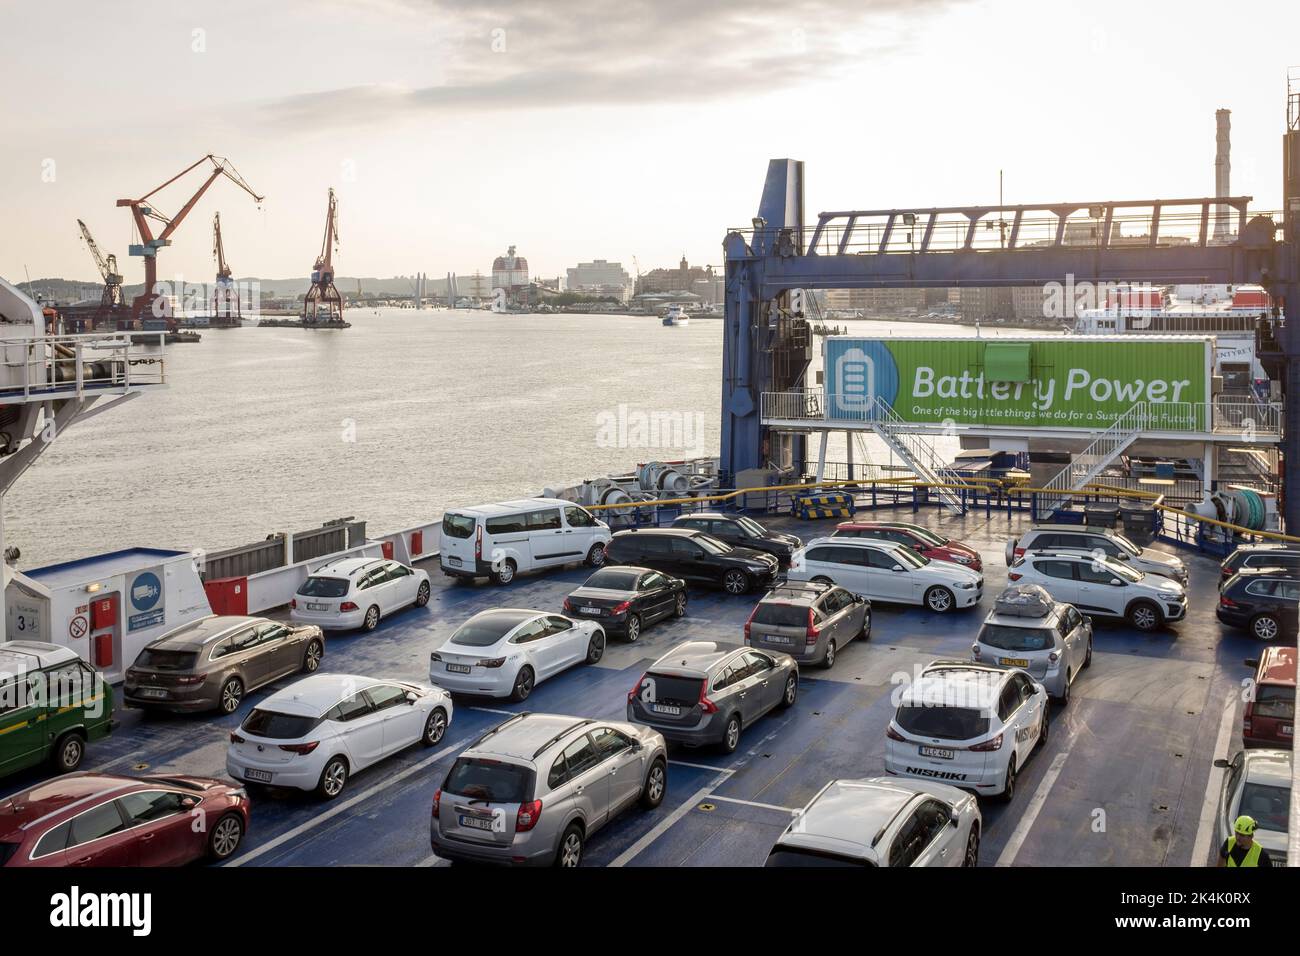 Cars parked on the car deck of the Stena Jutlandica ferry at the ferry terminal of Gothenburg, Sweden. A large sign indicating that the ferry is partly battery powered is seen at the stern of the vessel. Stock Photo